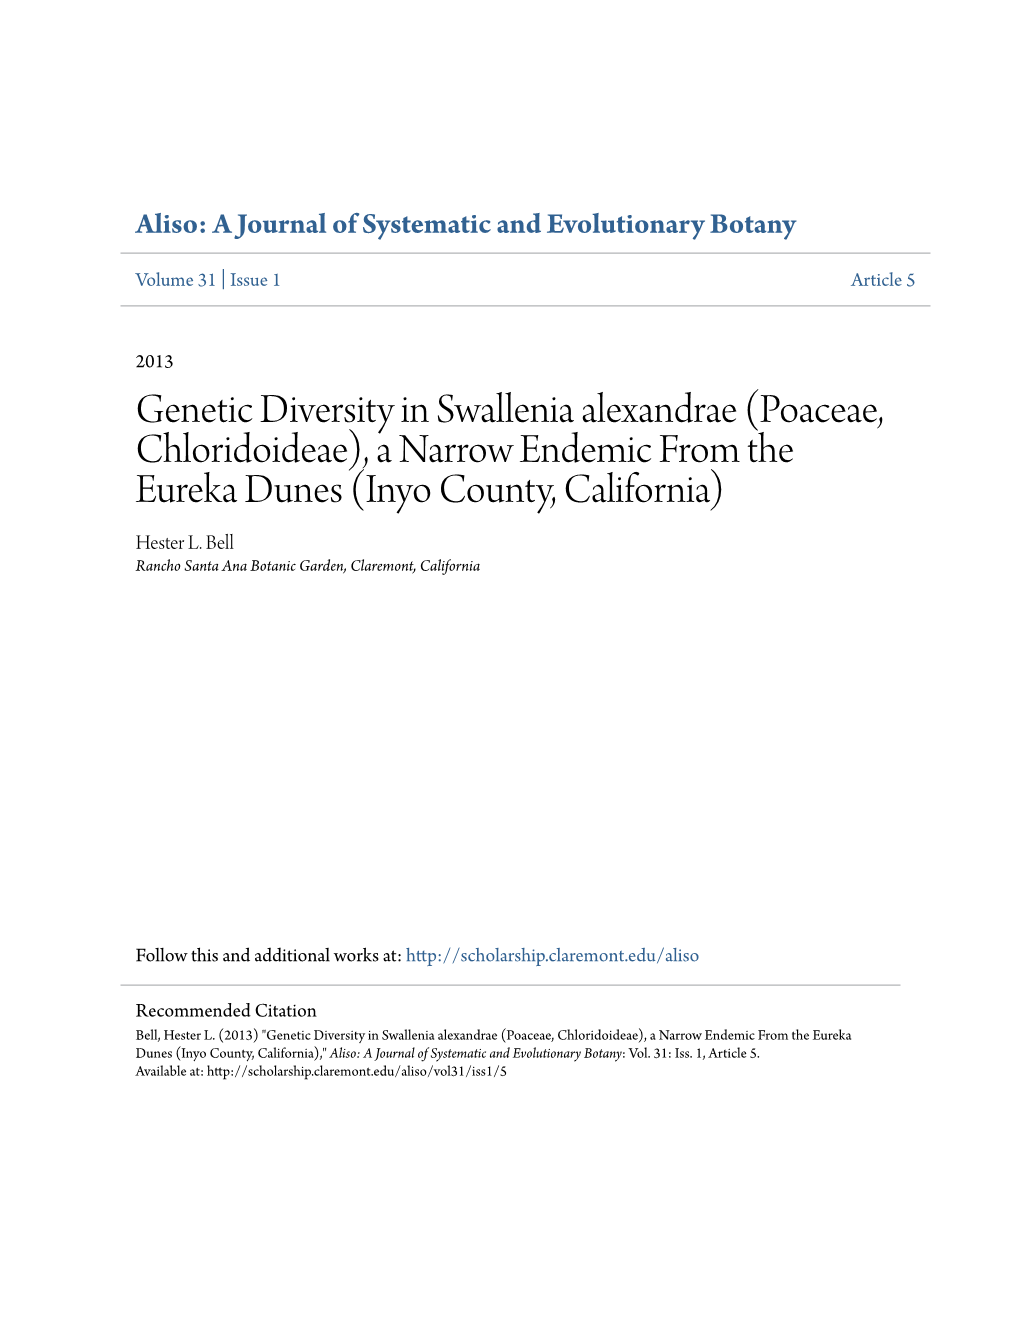 Genetic Diversity in Swallenia Alexandrae (Poaceae, Chloridoideae), a Narrow Endemic from the Eureka Dunes (Inyo County, California) Hester L